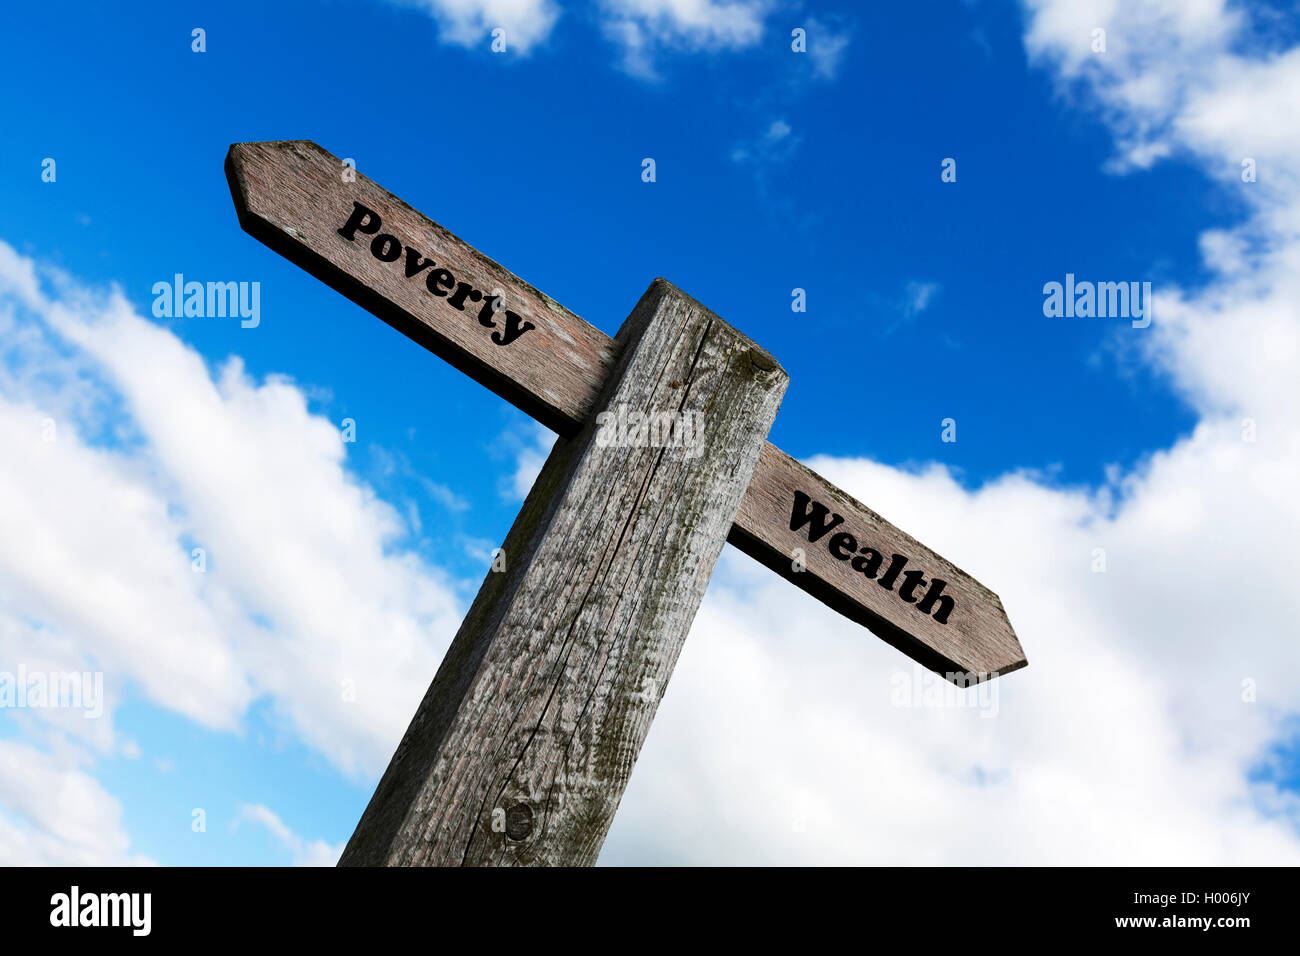 Poverty wealth concept road sign rich poor money debt haves & have nots riches choice choose direction future concepts signs Stock Photo